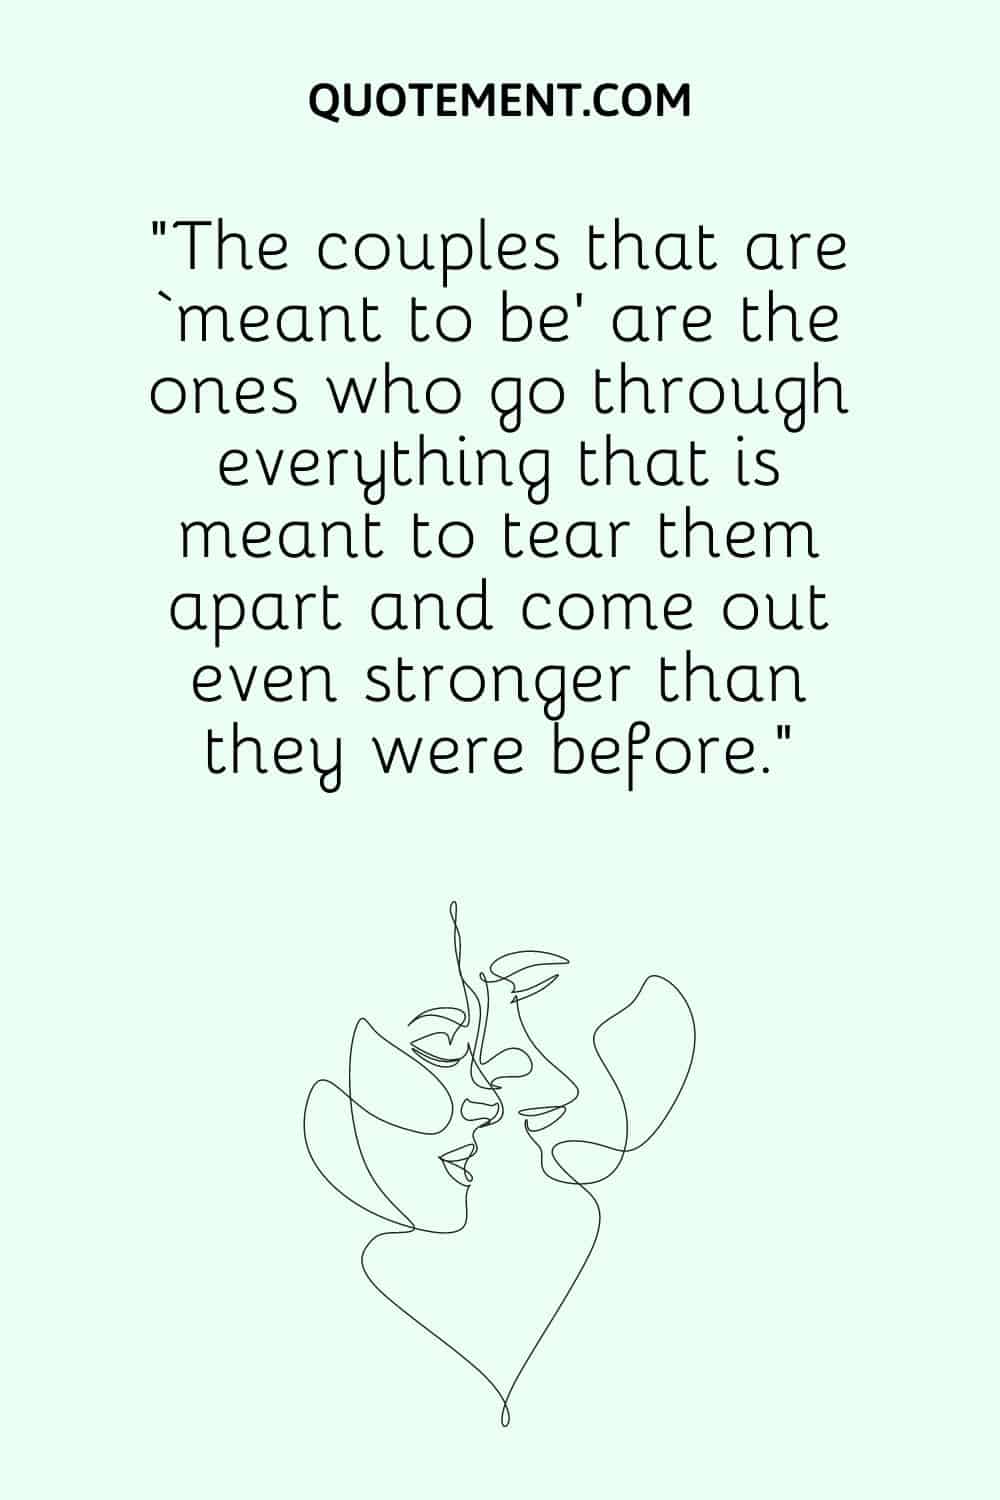 “The couples that are ‘meant to be’ are the ones who go through everything that is meant to tear them apart and come out even stronger than they were before.”